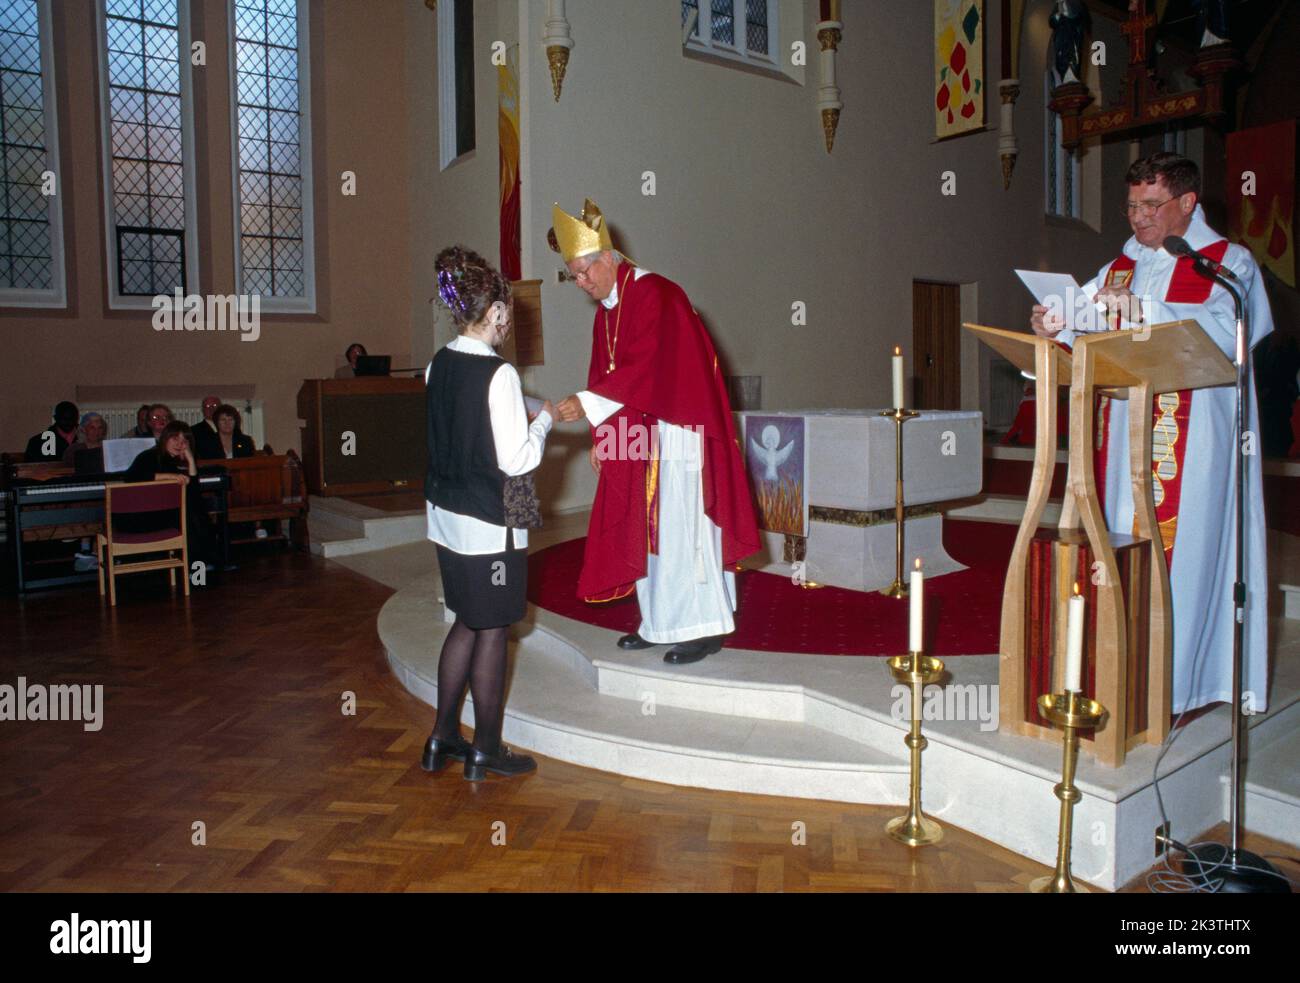 St Joseph's Church England Bishop Presenting Candidate a Certificate at Confirmation Stock Photo